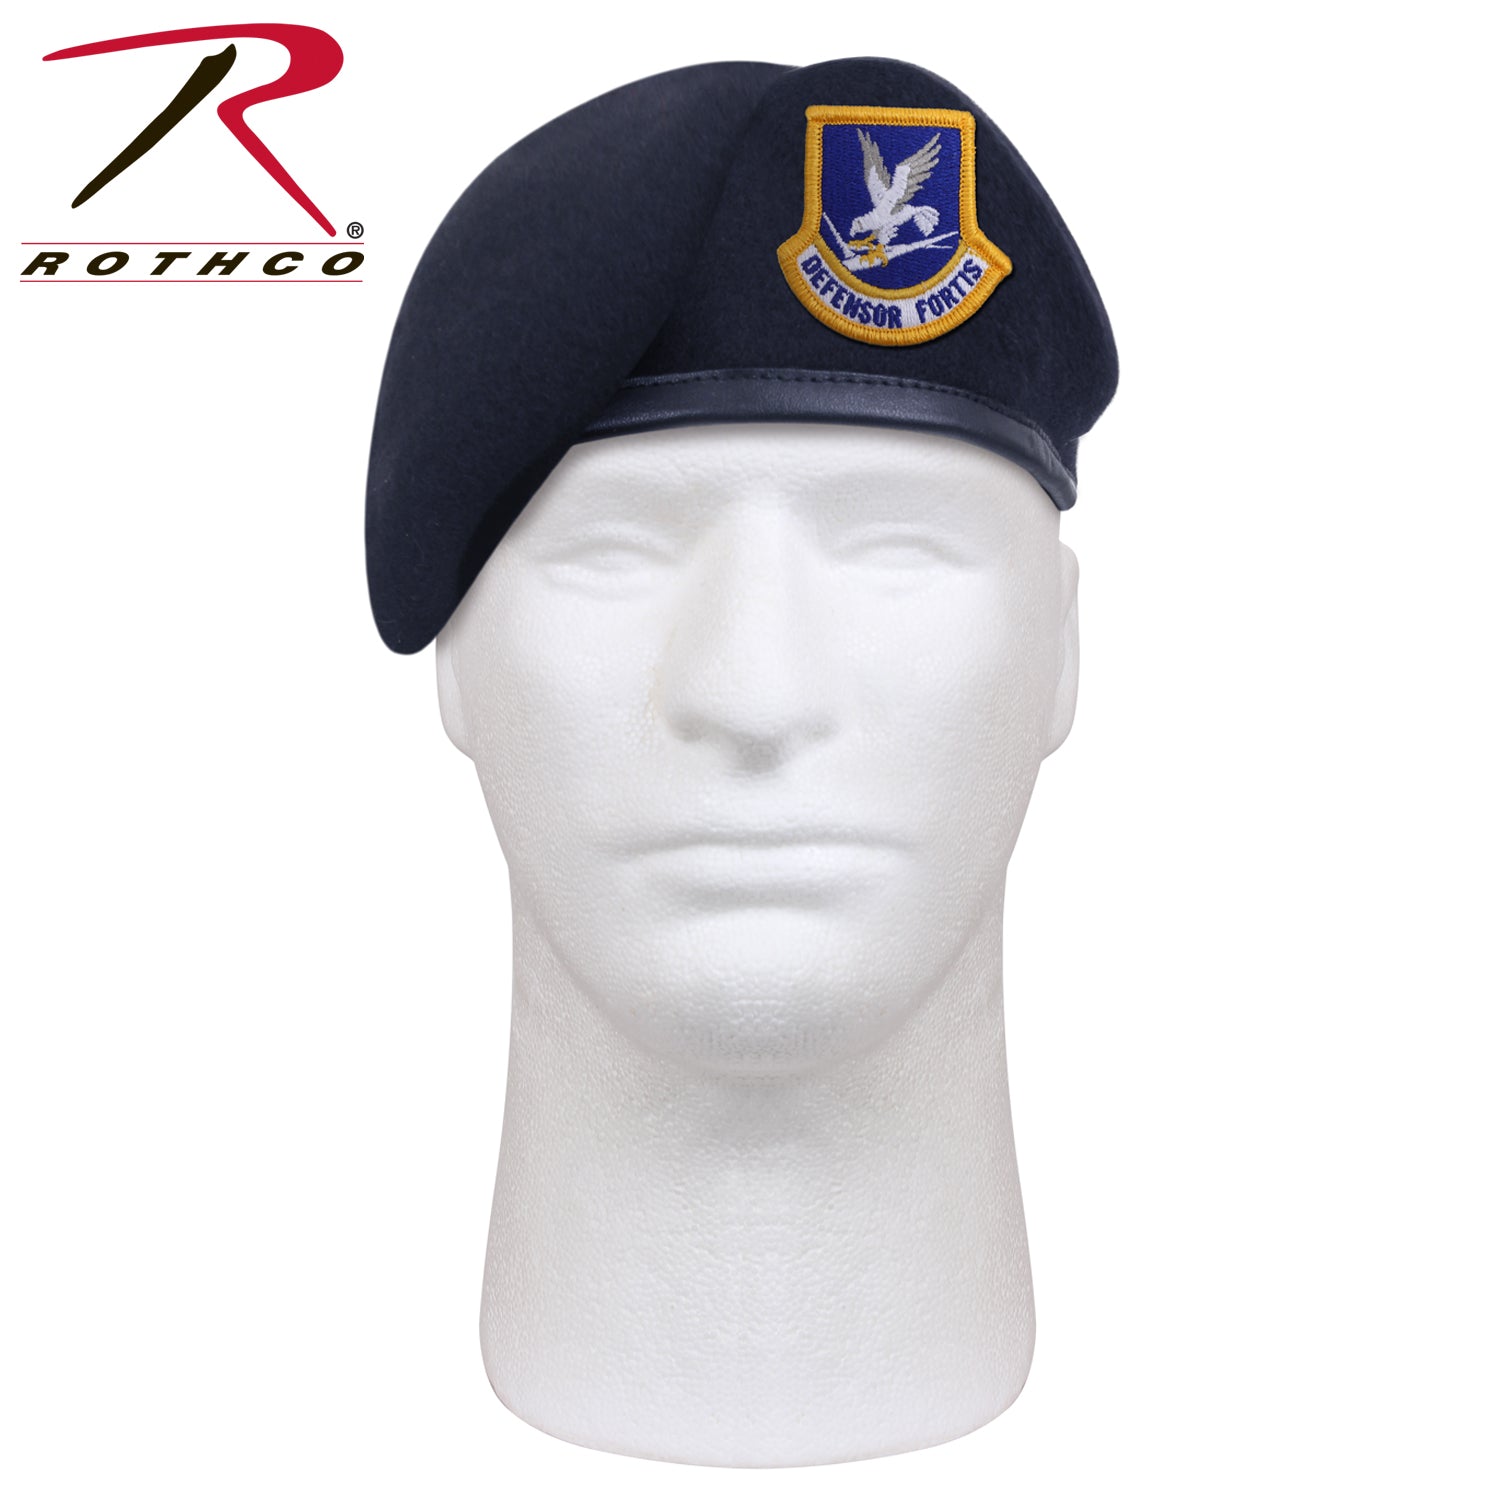 Inspection Ready Beret With USAF Flash - Midnight Navy Blue